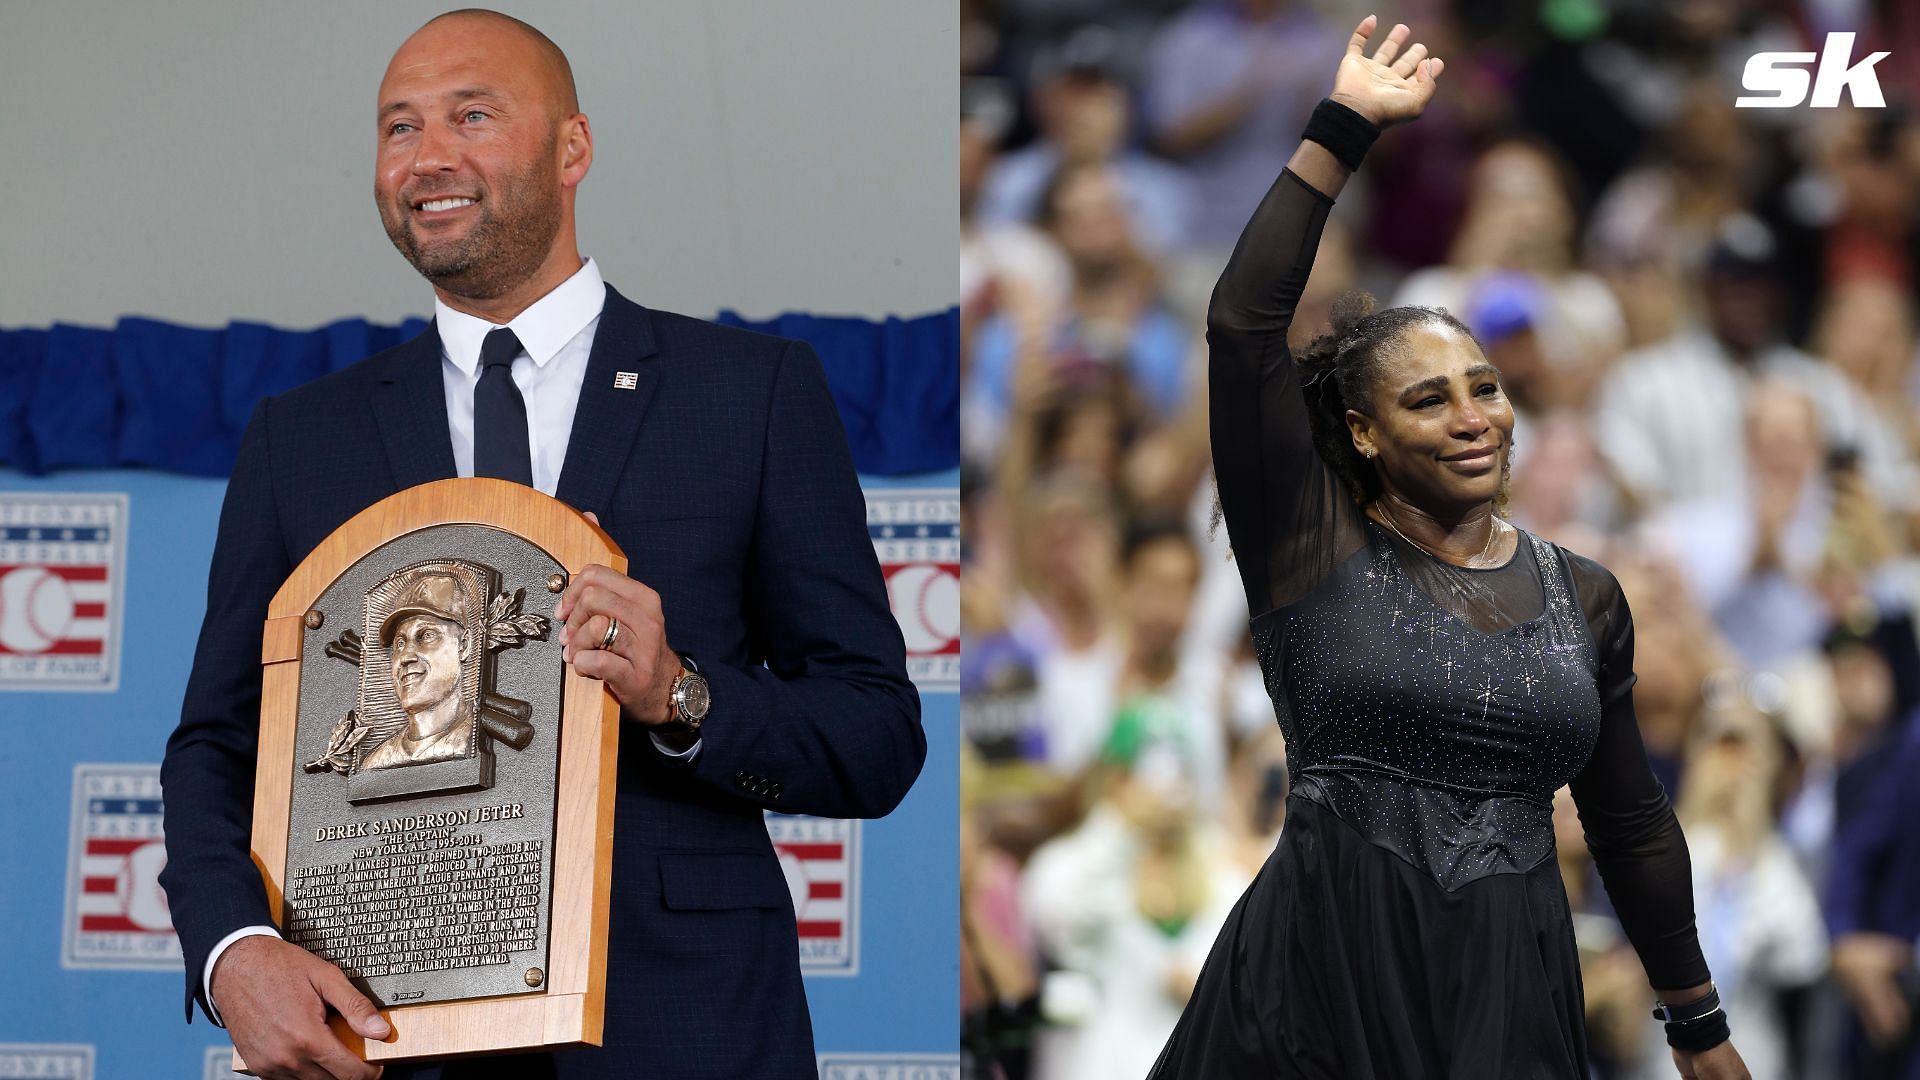 Even before he was immortalized, Derek Jeter was not afraid to appreciate the greats